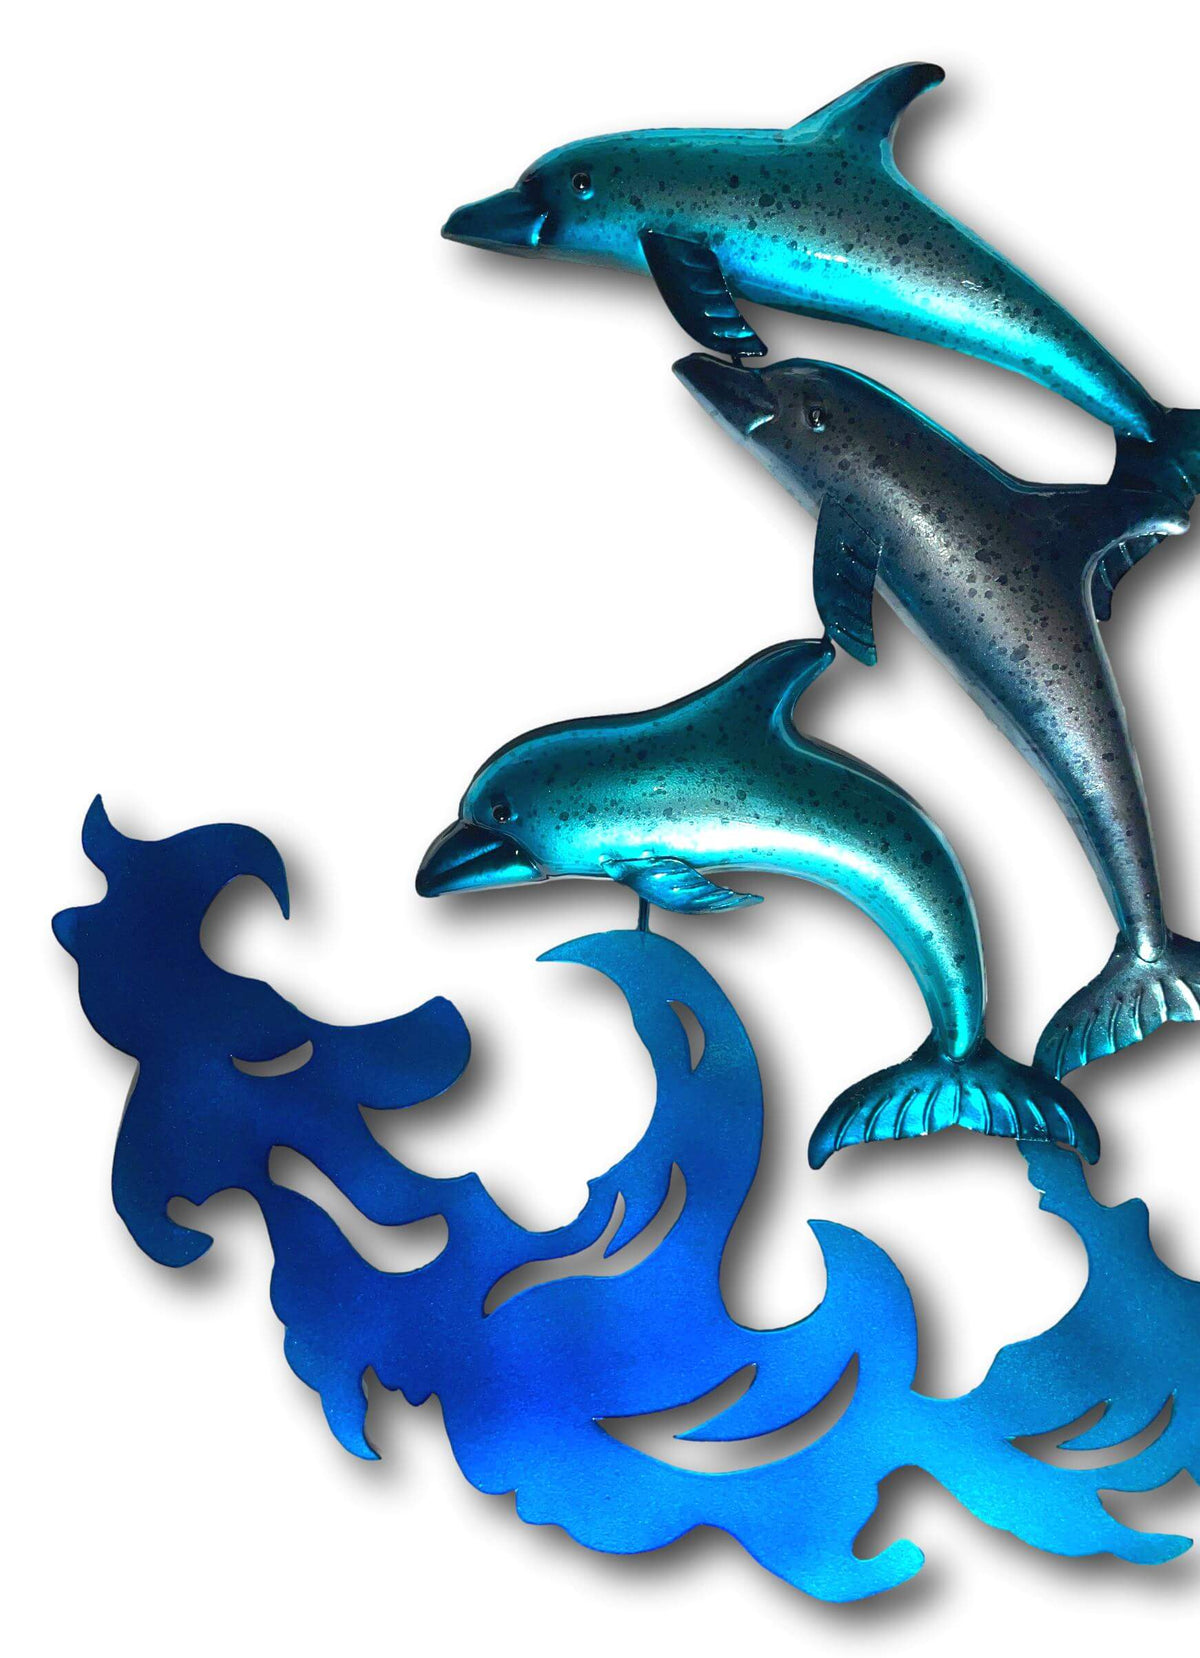 BLUE DOLPHINS JUMPING FROM THE WAVES WALL ART - HANDMADE METAL ART + SINGING BOWLS AND MEDITATION